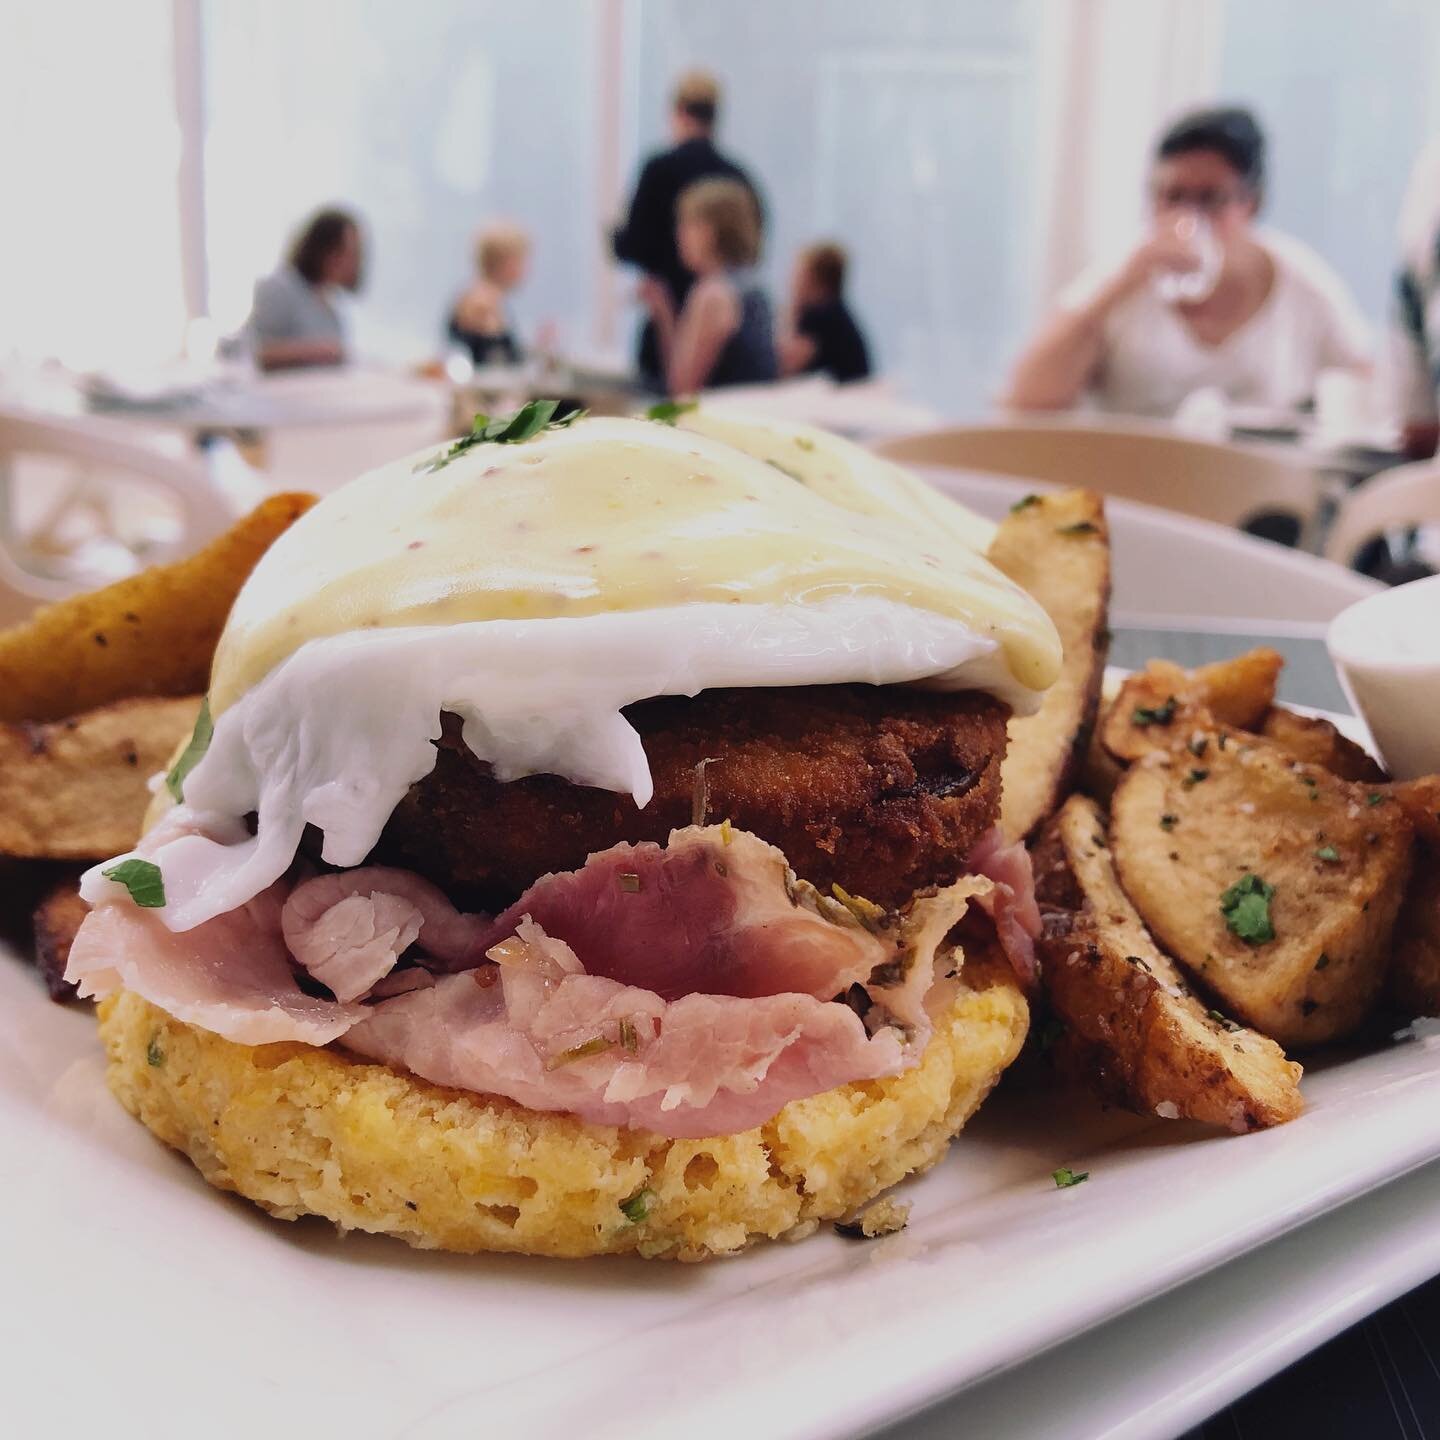 Not normally a huge eggs benedict fan, but add country ham and a fried green tomato and throw it on a sweet-potato scallion biscuit, and I&rsquo;m all in 🤩 #putaneggonit